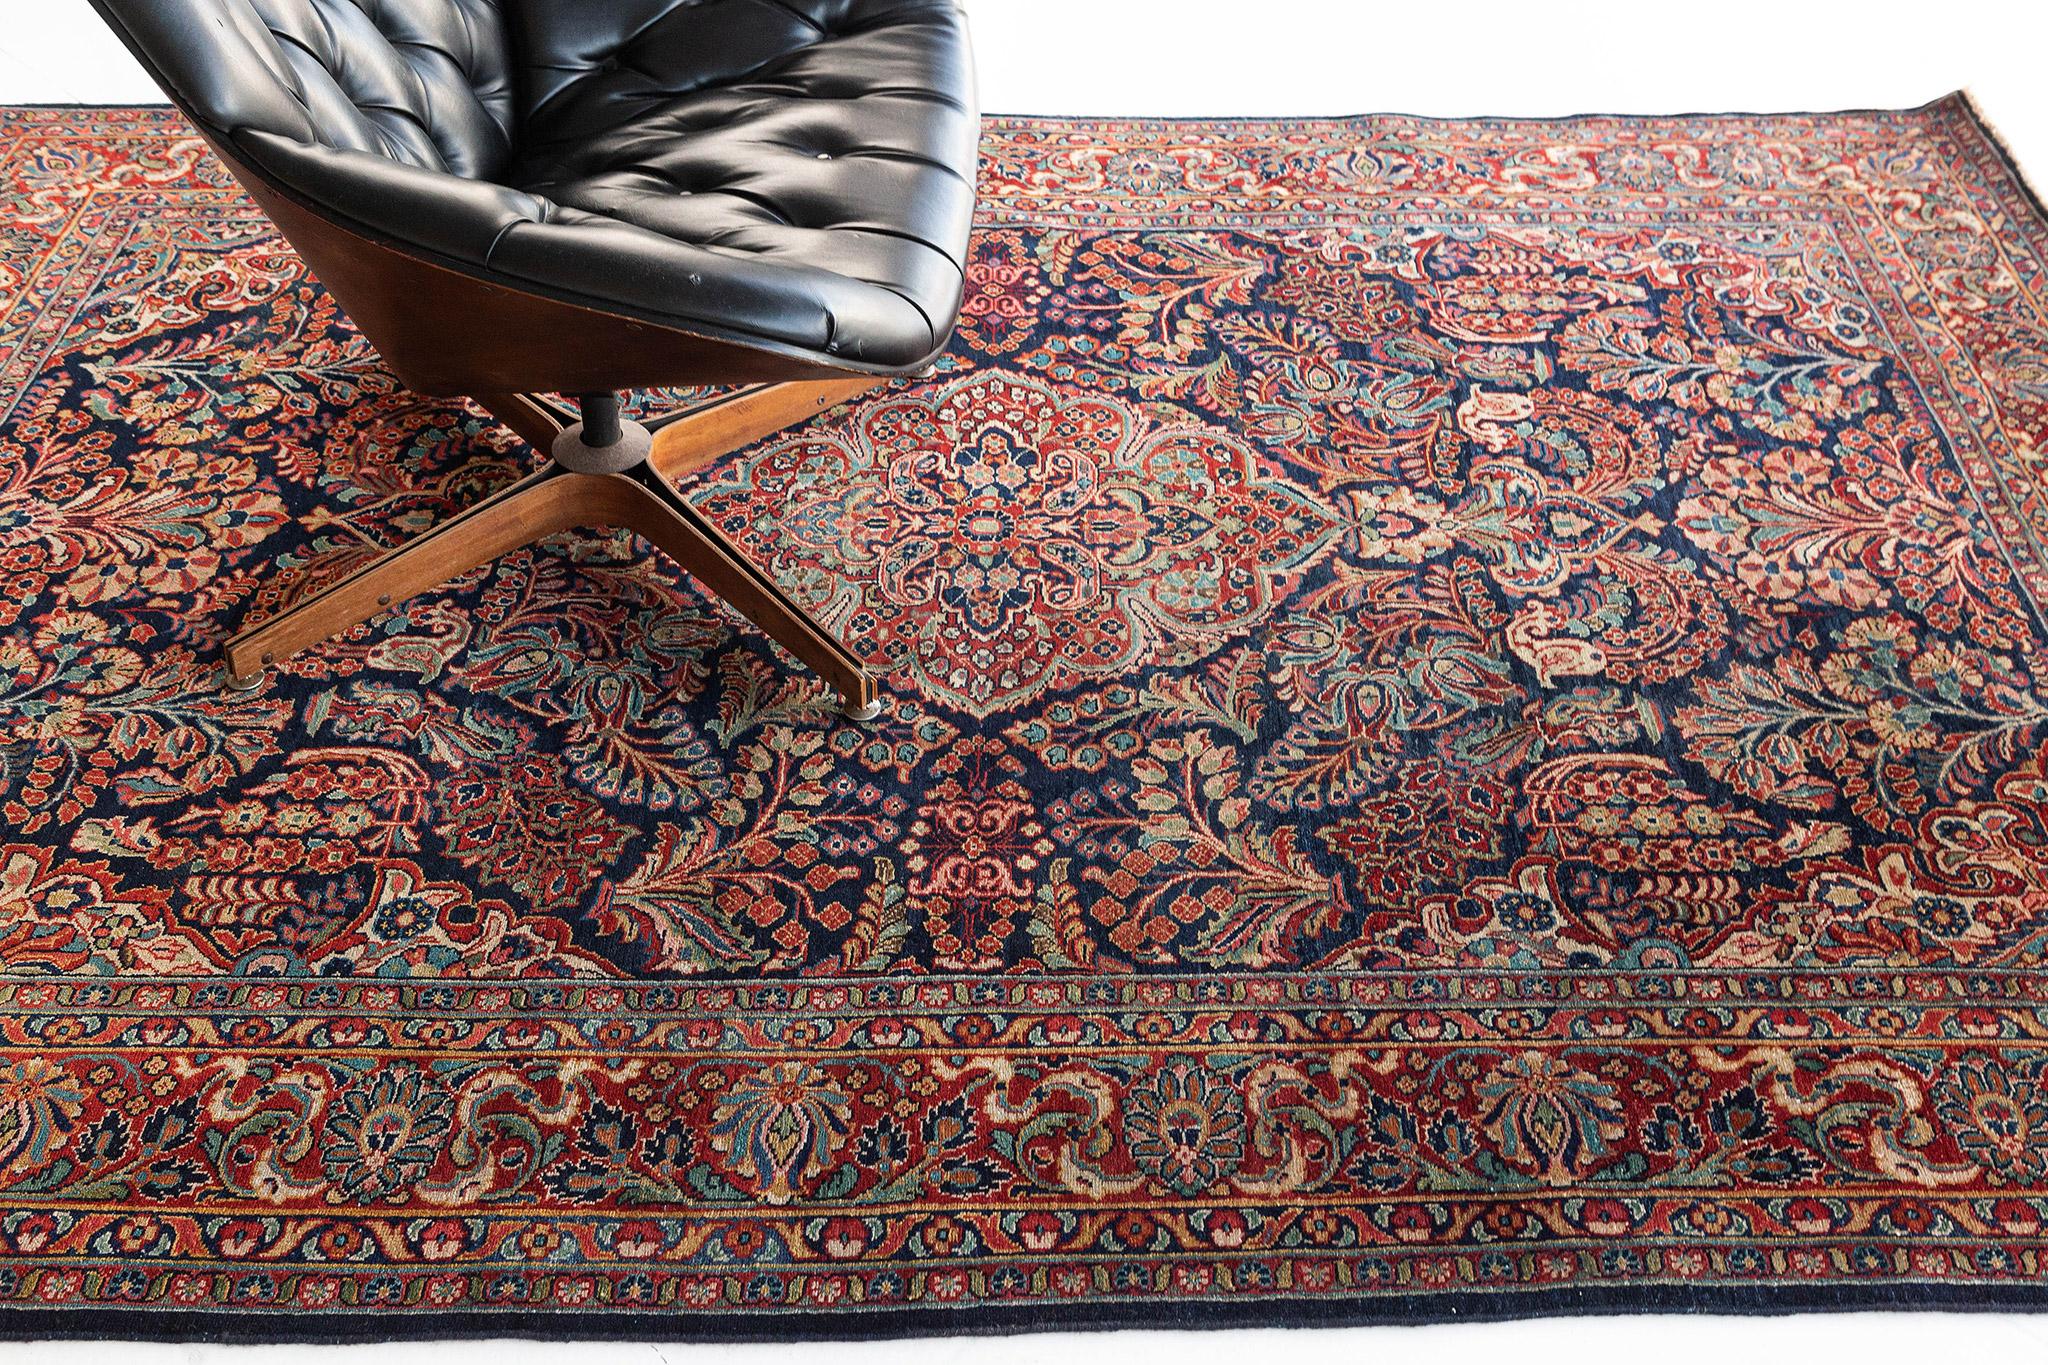 Characterized by an impressive and vibrant composition, this eccentric Sarouk Persian Rug showcases some of the finer points of classical Persian rug weaving. A dazzling earth-toned palette enhances an alluring design to form a gorgeous